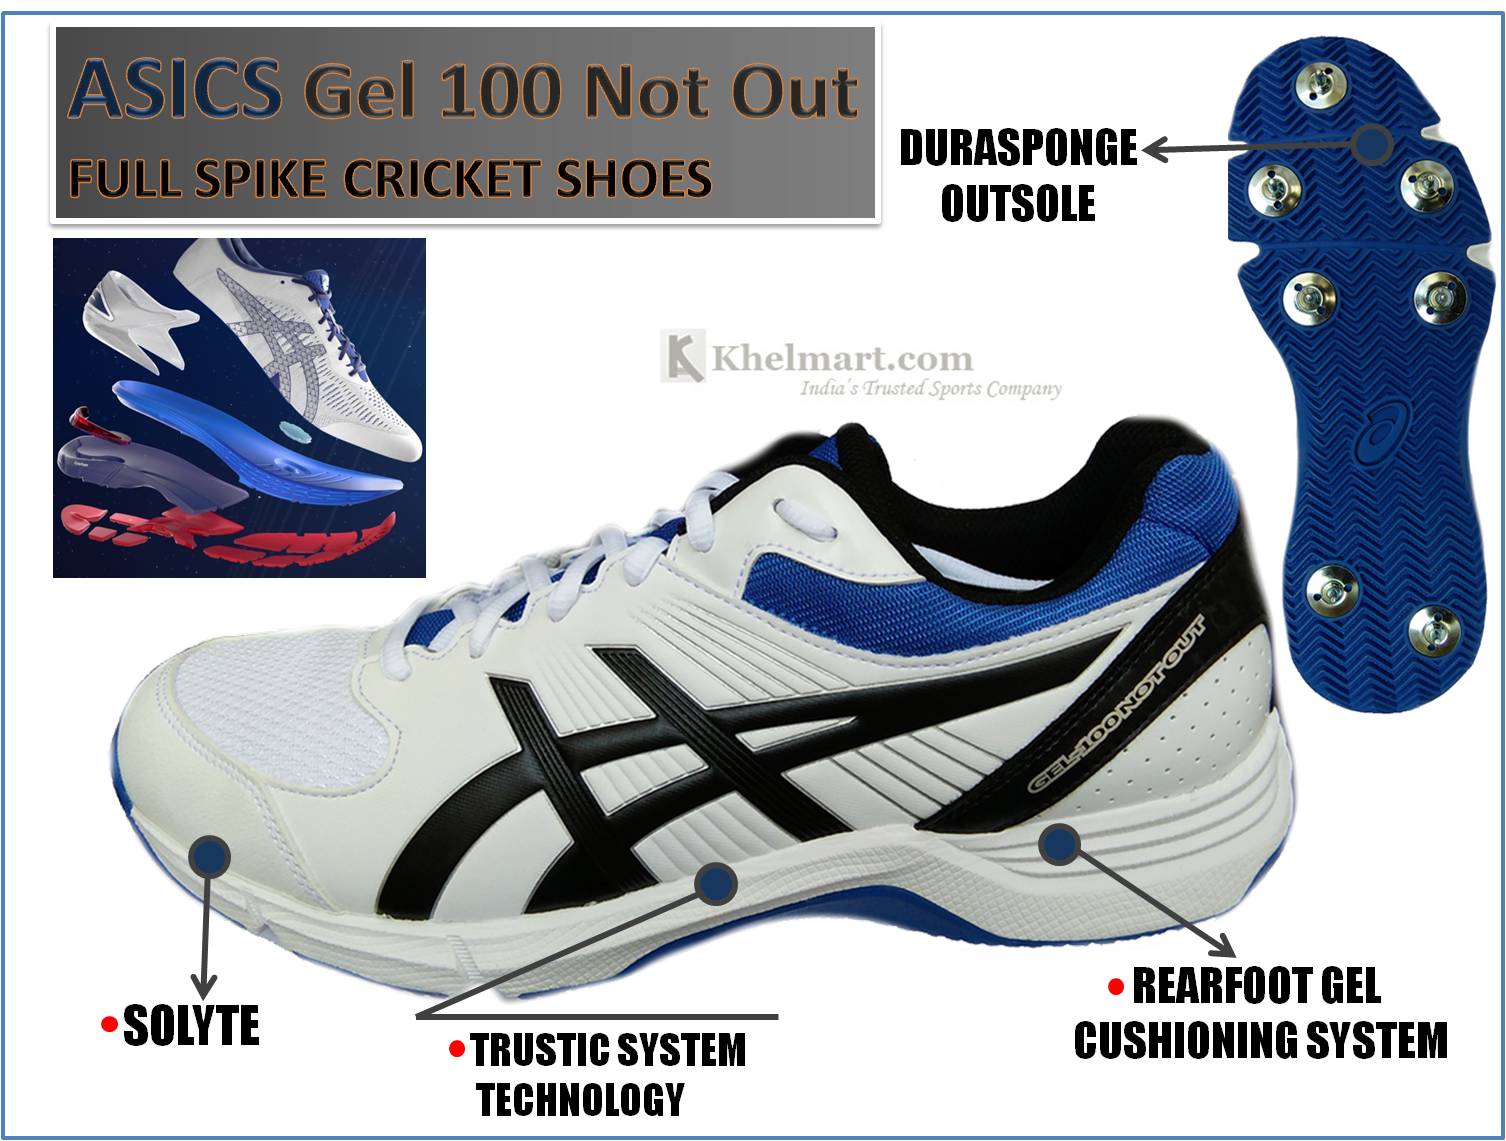 Asics_Gel_100_Not_Out_Full_Spike_Cricket_Shoes_color_WHITE_ONYX_AND_BLUE.jpg